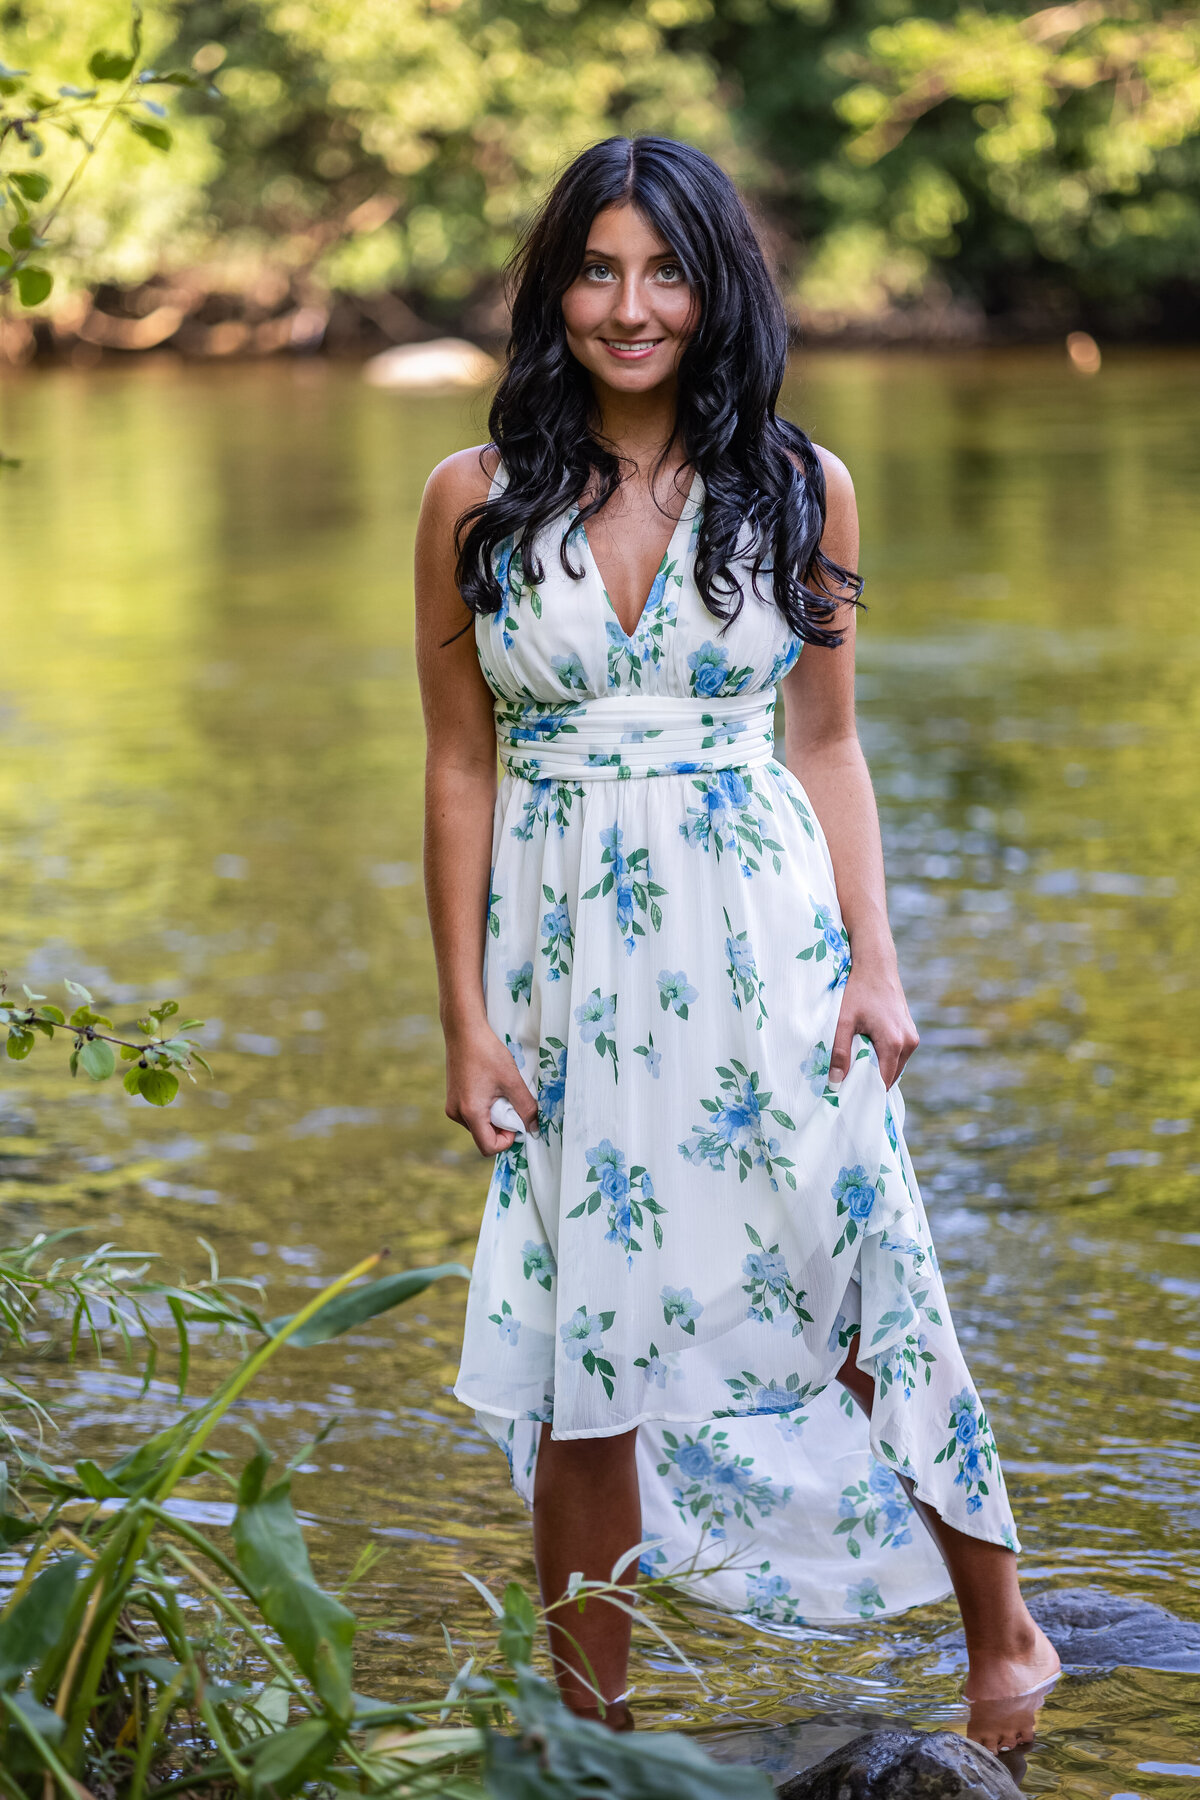 A female high school senior is posing in a long white dress with blue flowers.  She is standing in a river with water coming up to her ankles